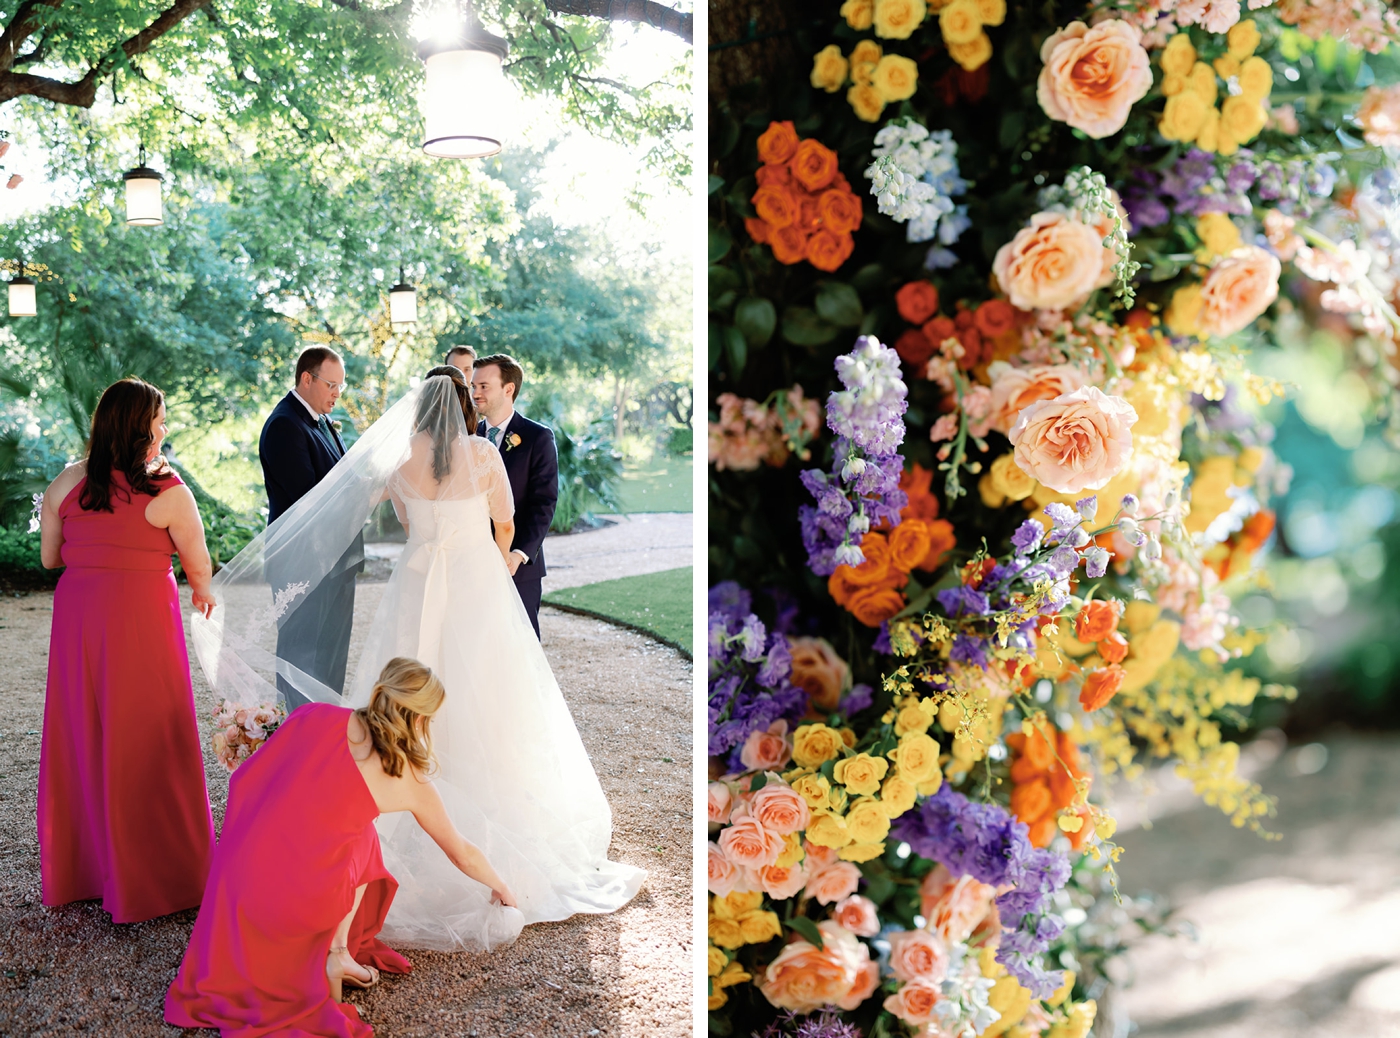 Spring wedding floral arch with orange, peach, and yellow roses and purple delphinium